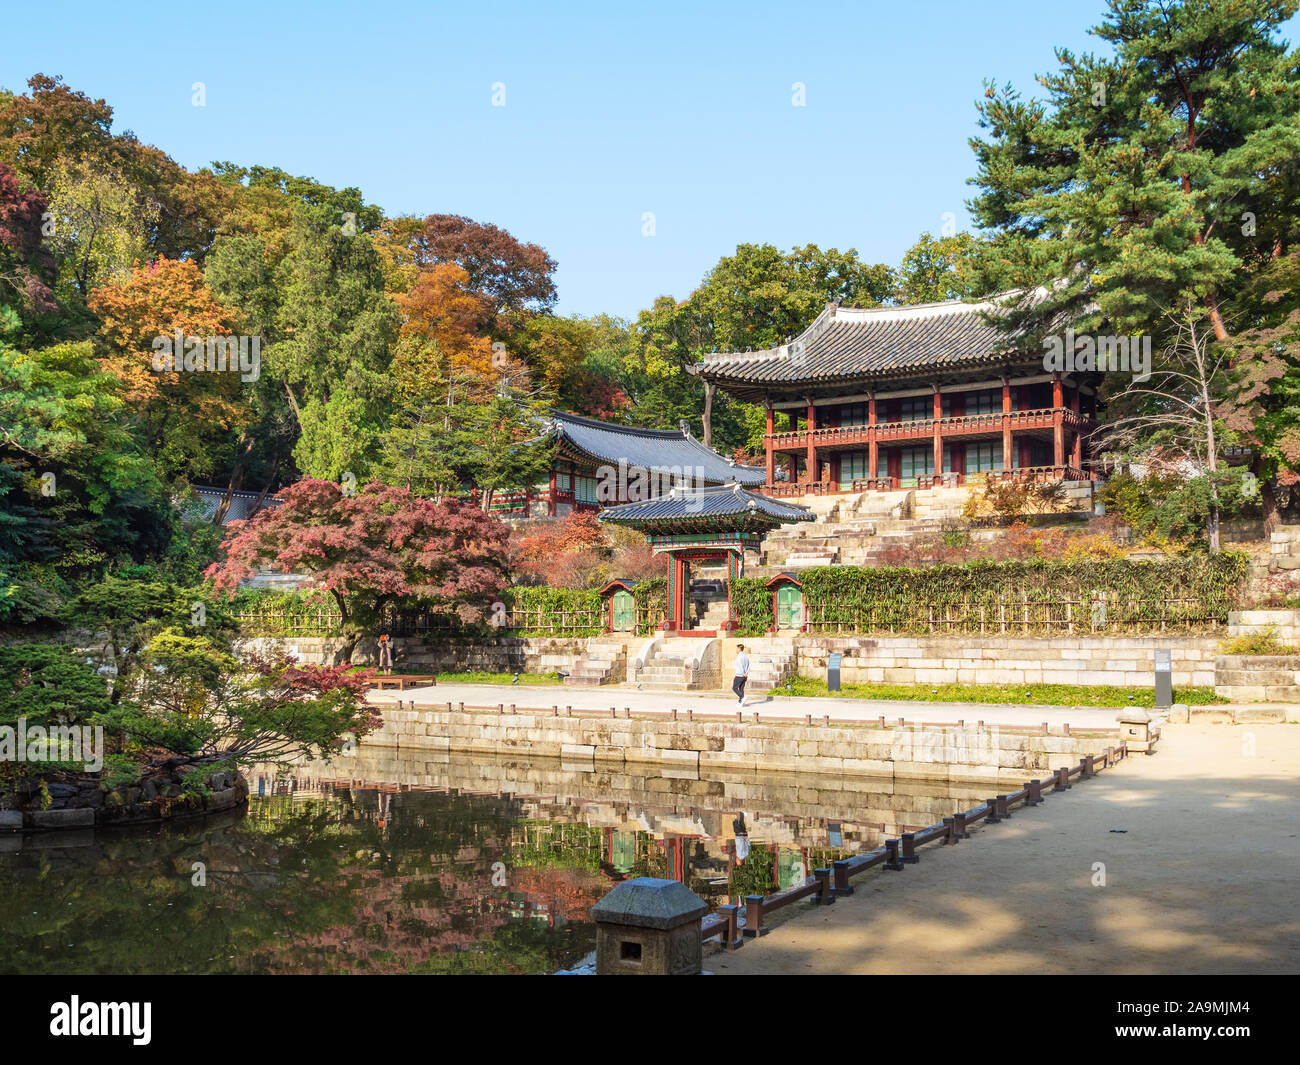 SEOUL, SOUTH KOREA - OCTOBER 31, 2019: visitor near Juhamnu house and Buyeongji pond in Huwon Secret Rear Garden of Changdeokgung Palace Complex in Se Stock Photo